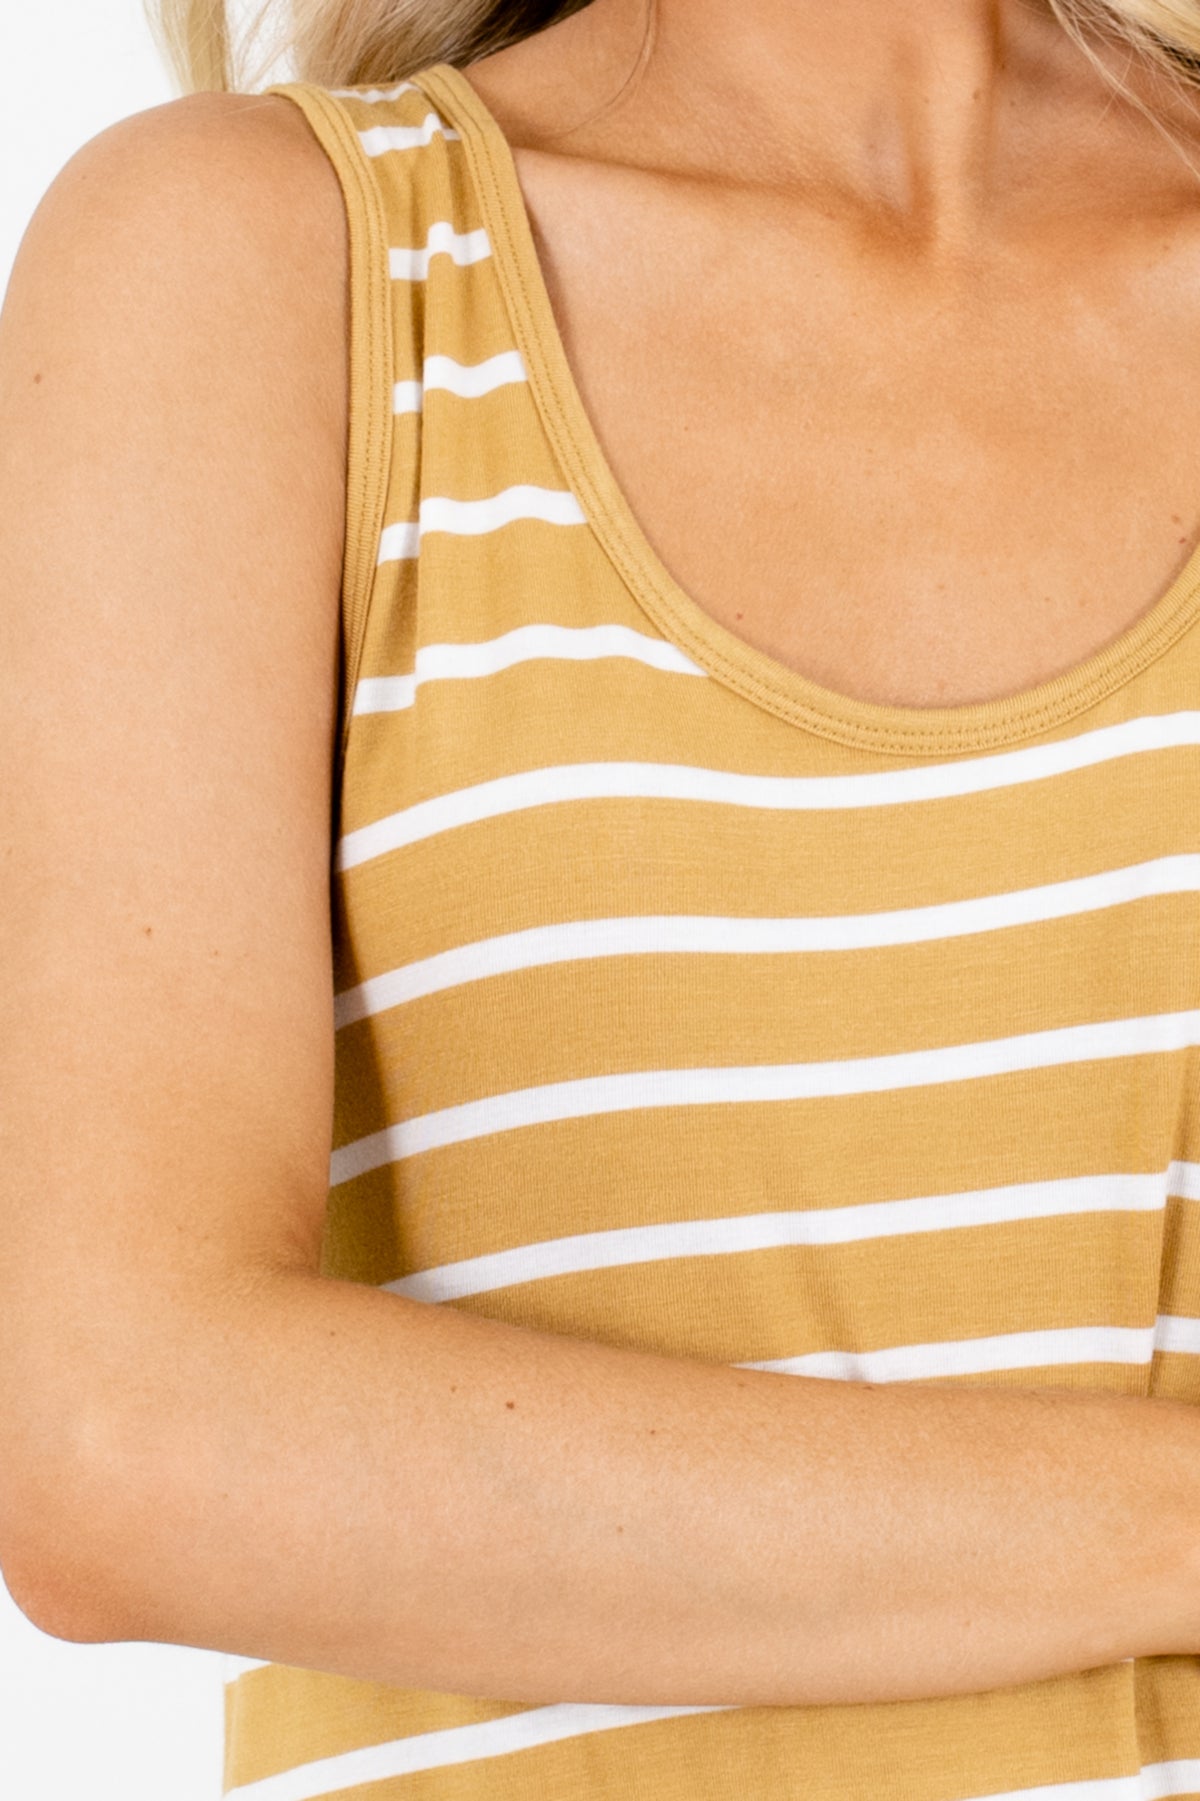 Boutique Tank Top with Stripes in Mustard Yellow.